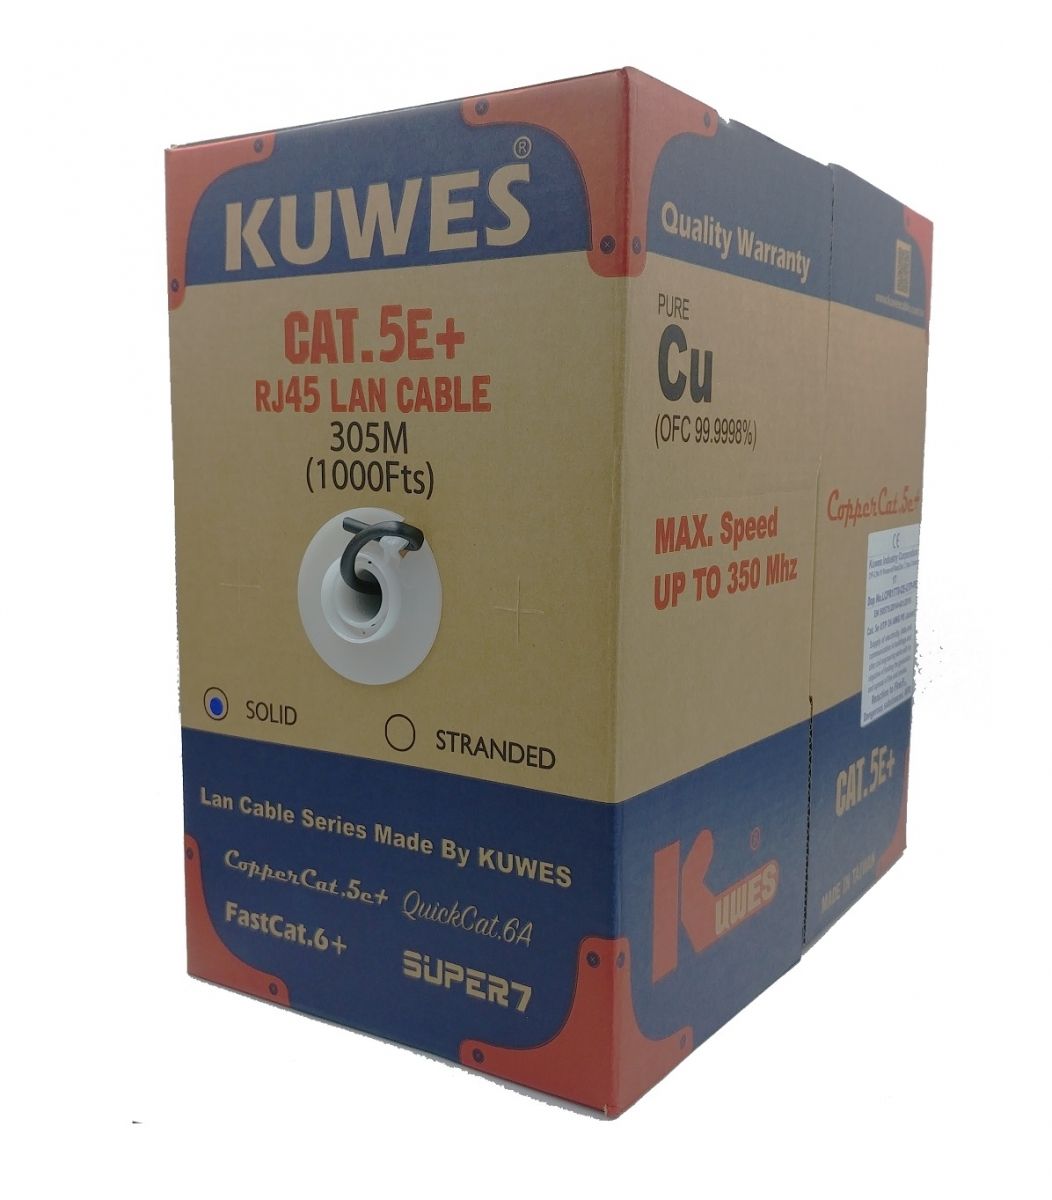 kuwes-cat5e-lan-solid-cable-305m-box-gray-1052x1200.jpg